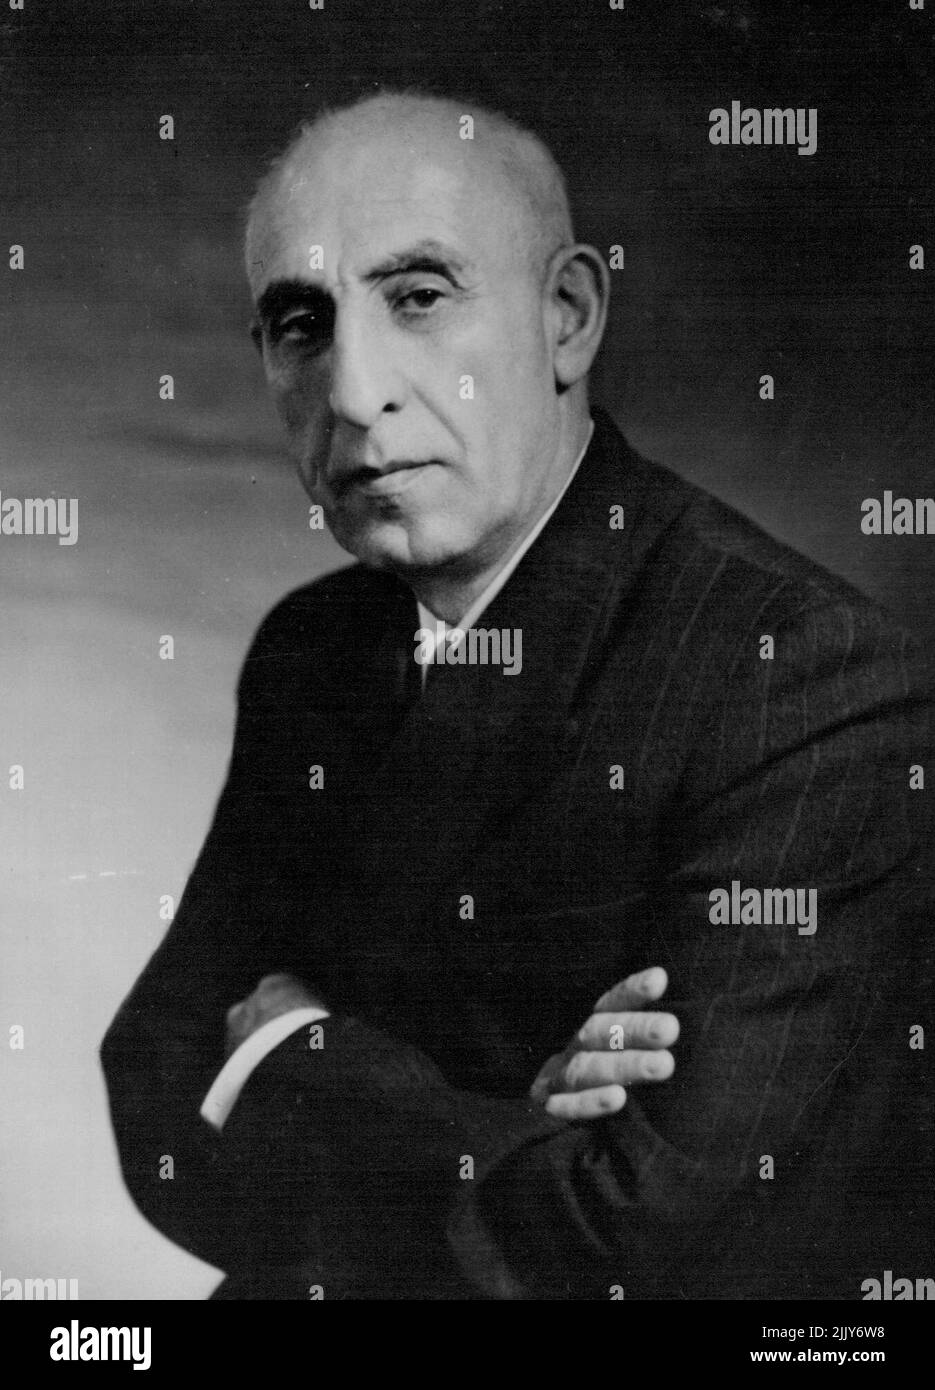 Dr. Mohammed Mossadeq - Prime Minister of Persia. February 06, 1952. (Photo by Fahian, Camera Press). Stock Photo